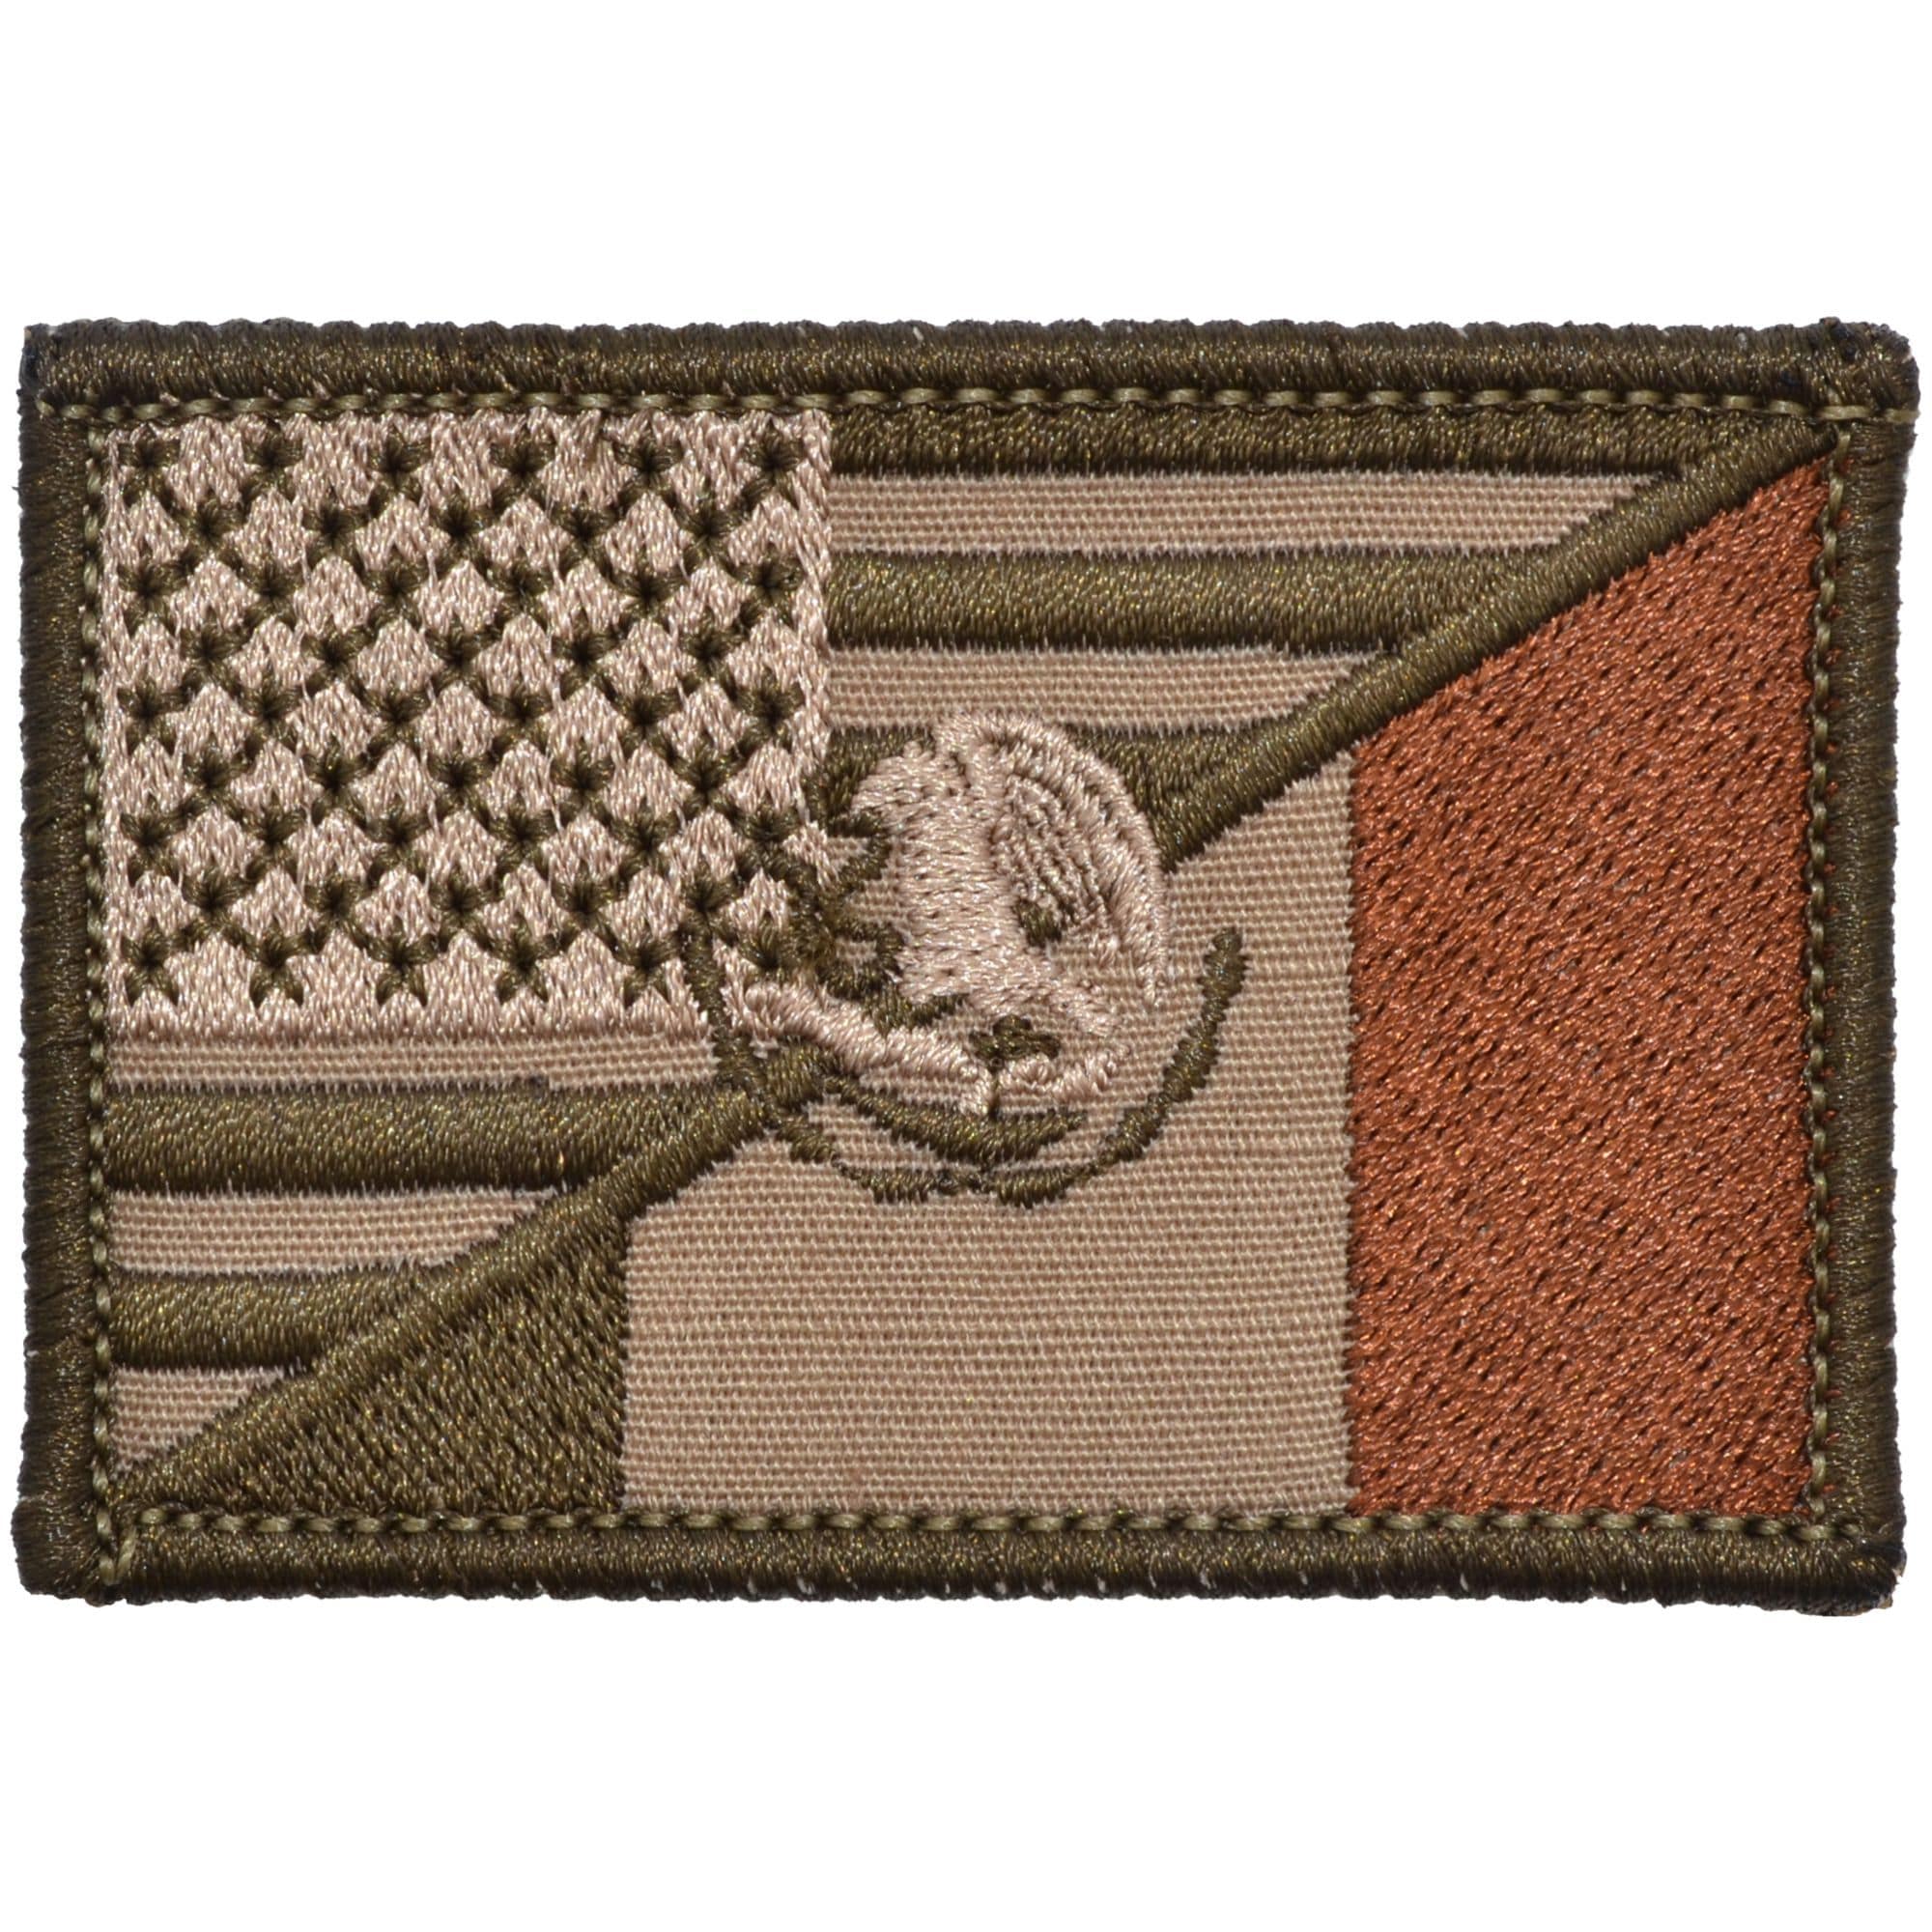 Tactical Gear Junkie Patches Coyote Brown USA / Mexico Flag Patch 2x3